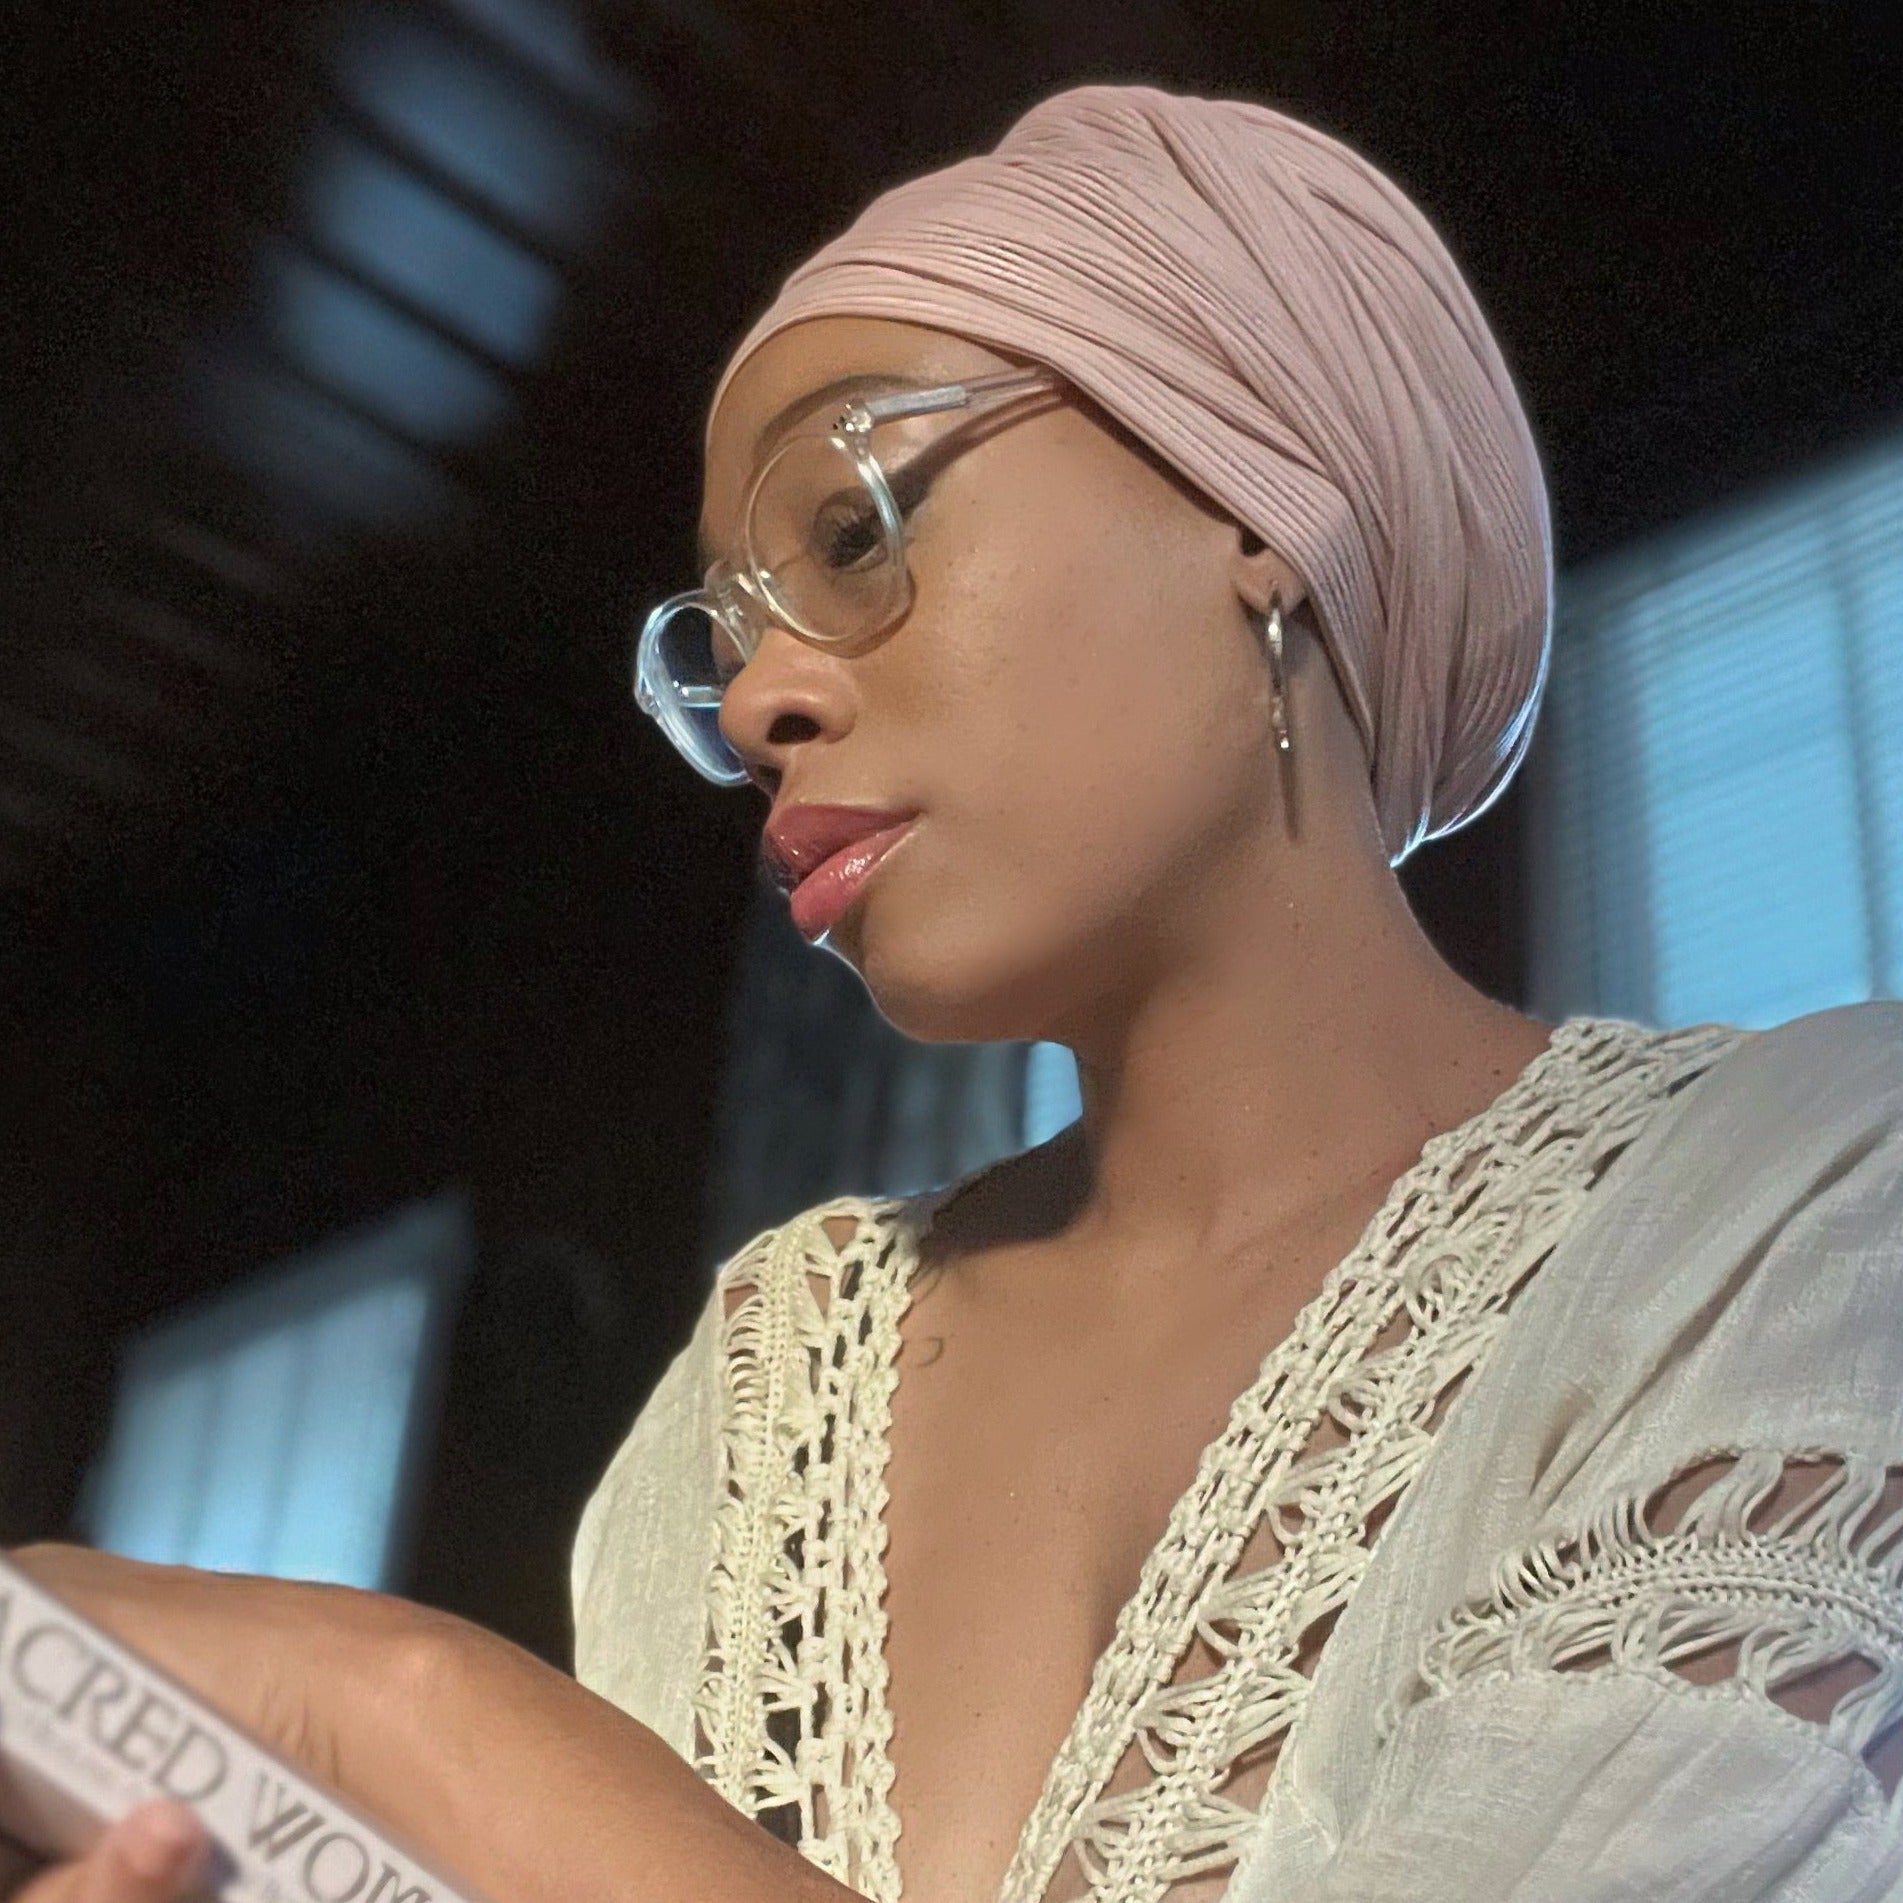 model wearing stretch ribbed rose, light pink head wrap while reading a book